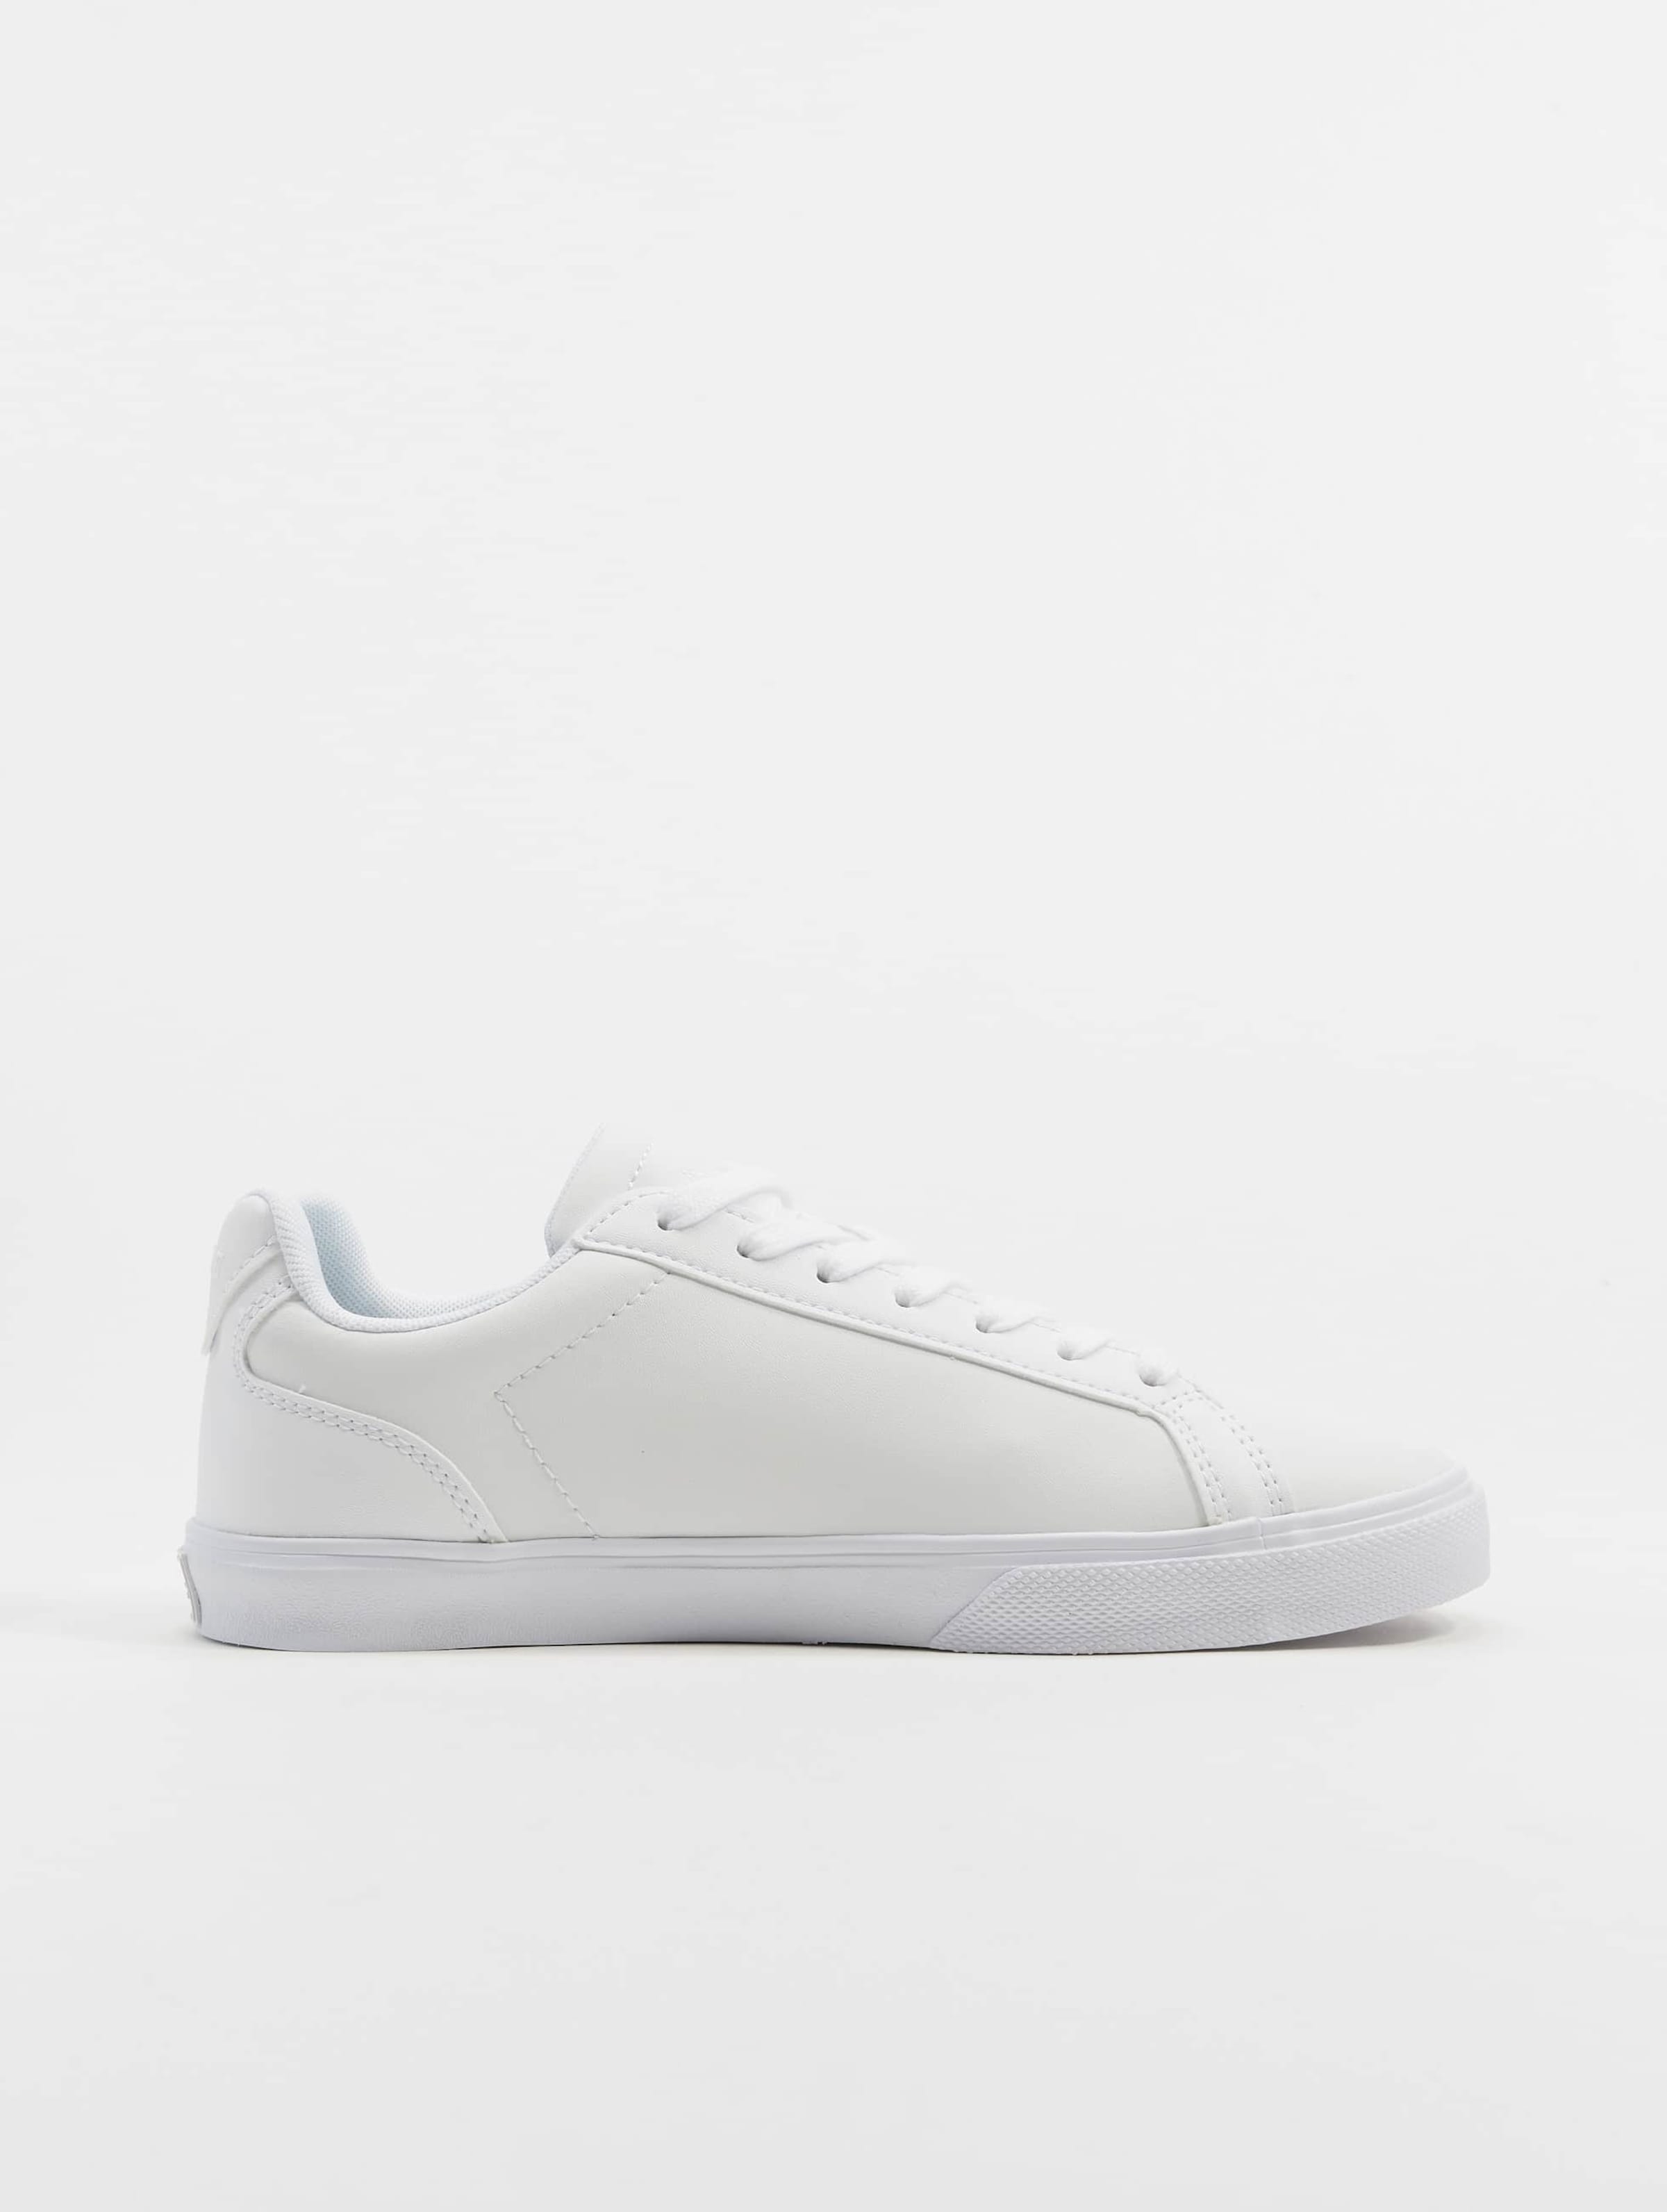 LACOSTE Lineshot Leather Sneakers 746SMA0088WN1 - Shiekh